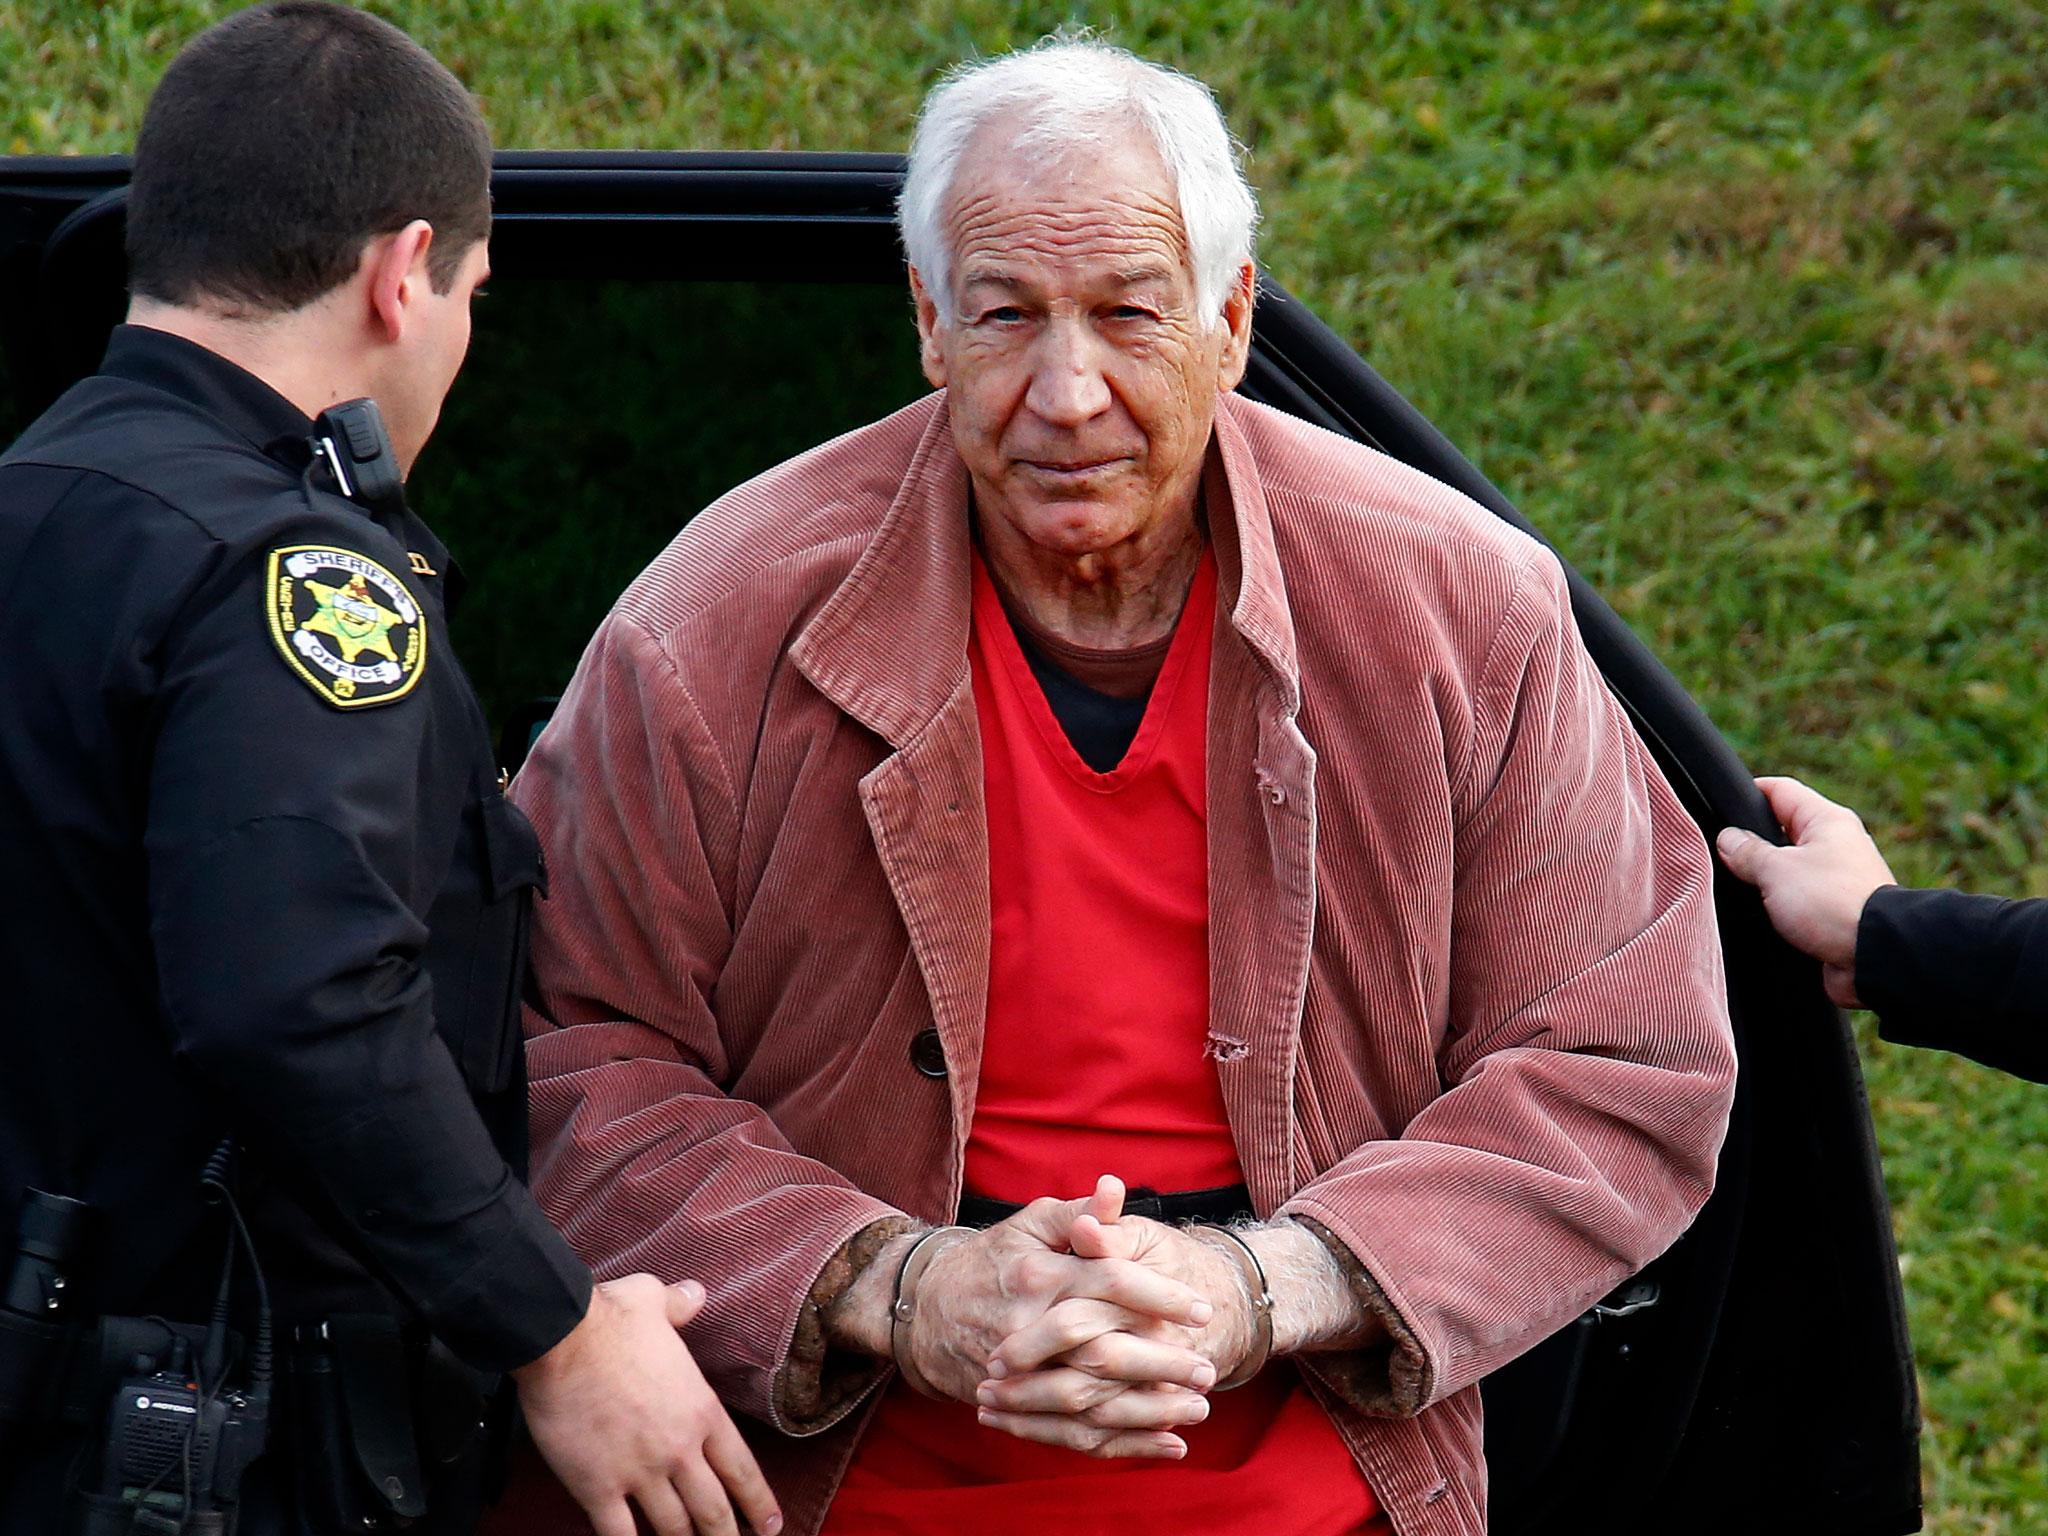 Sandusky, who waived his right to testify in 2012, said he was not represented by his defense.